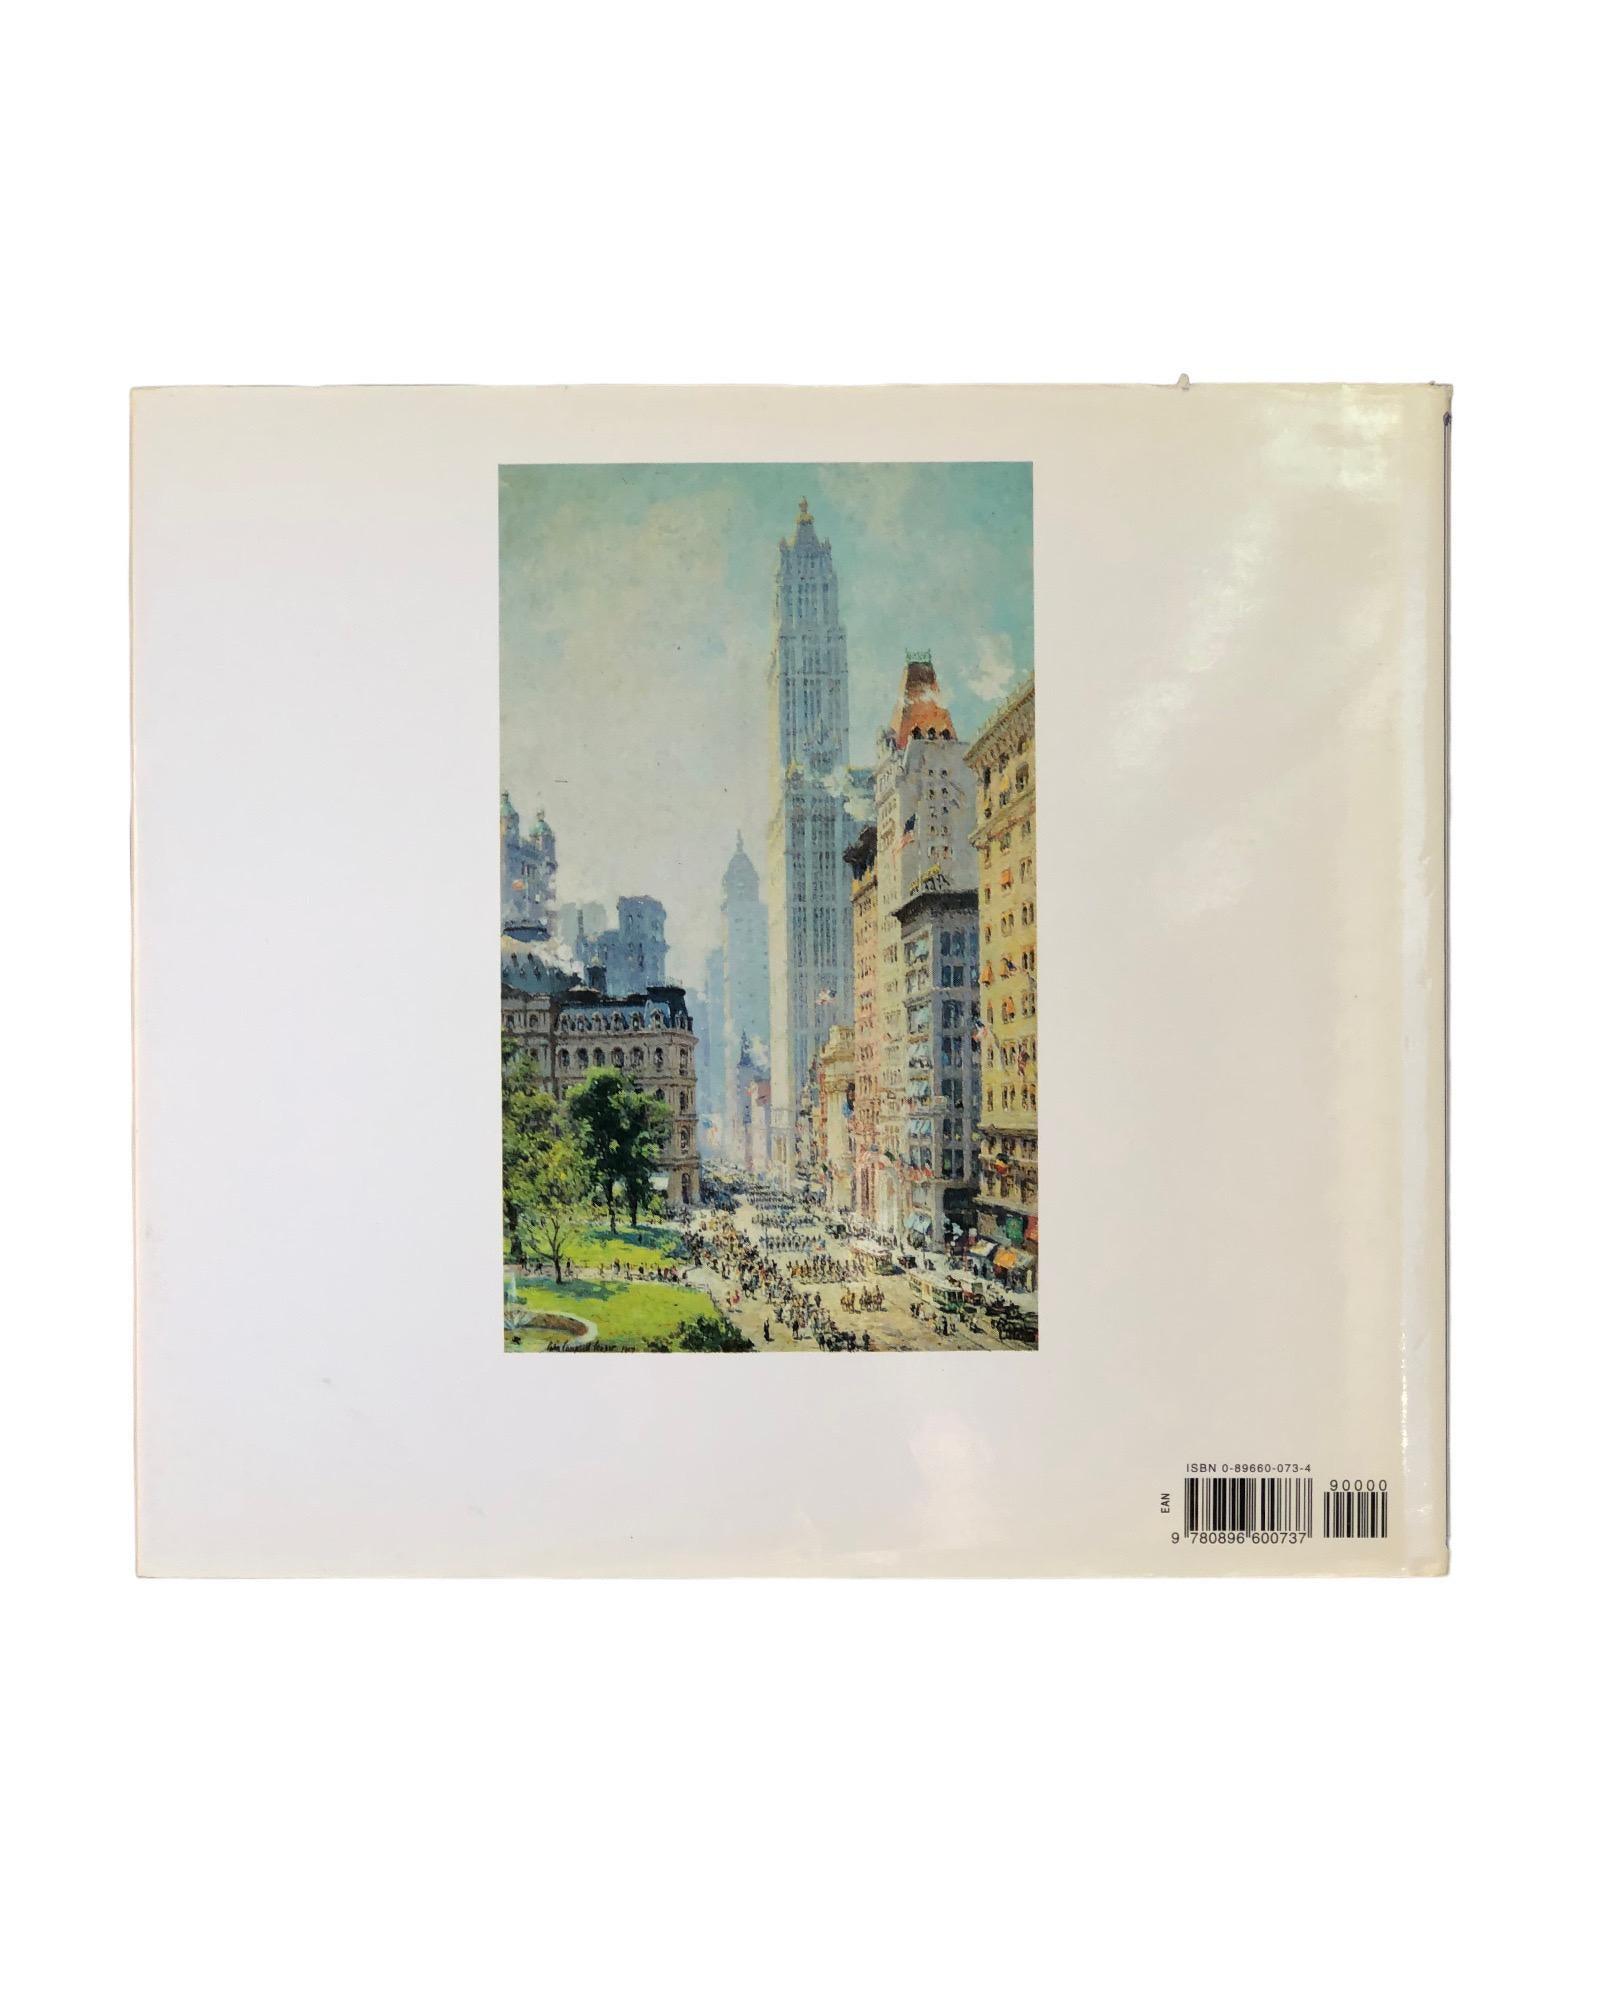 Impressionist New York by William H. Gerdts. Hardcover book with dustjacket. Stated first edition published by Artabras in 1994. Printed in Italy, illustrated, 224 pages.
